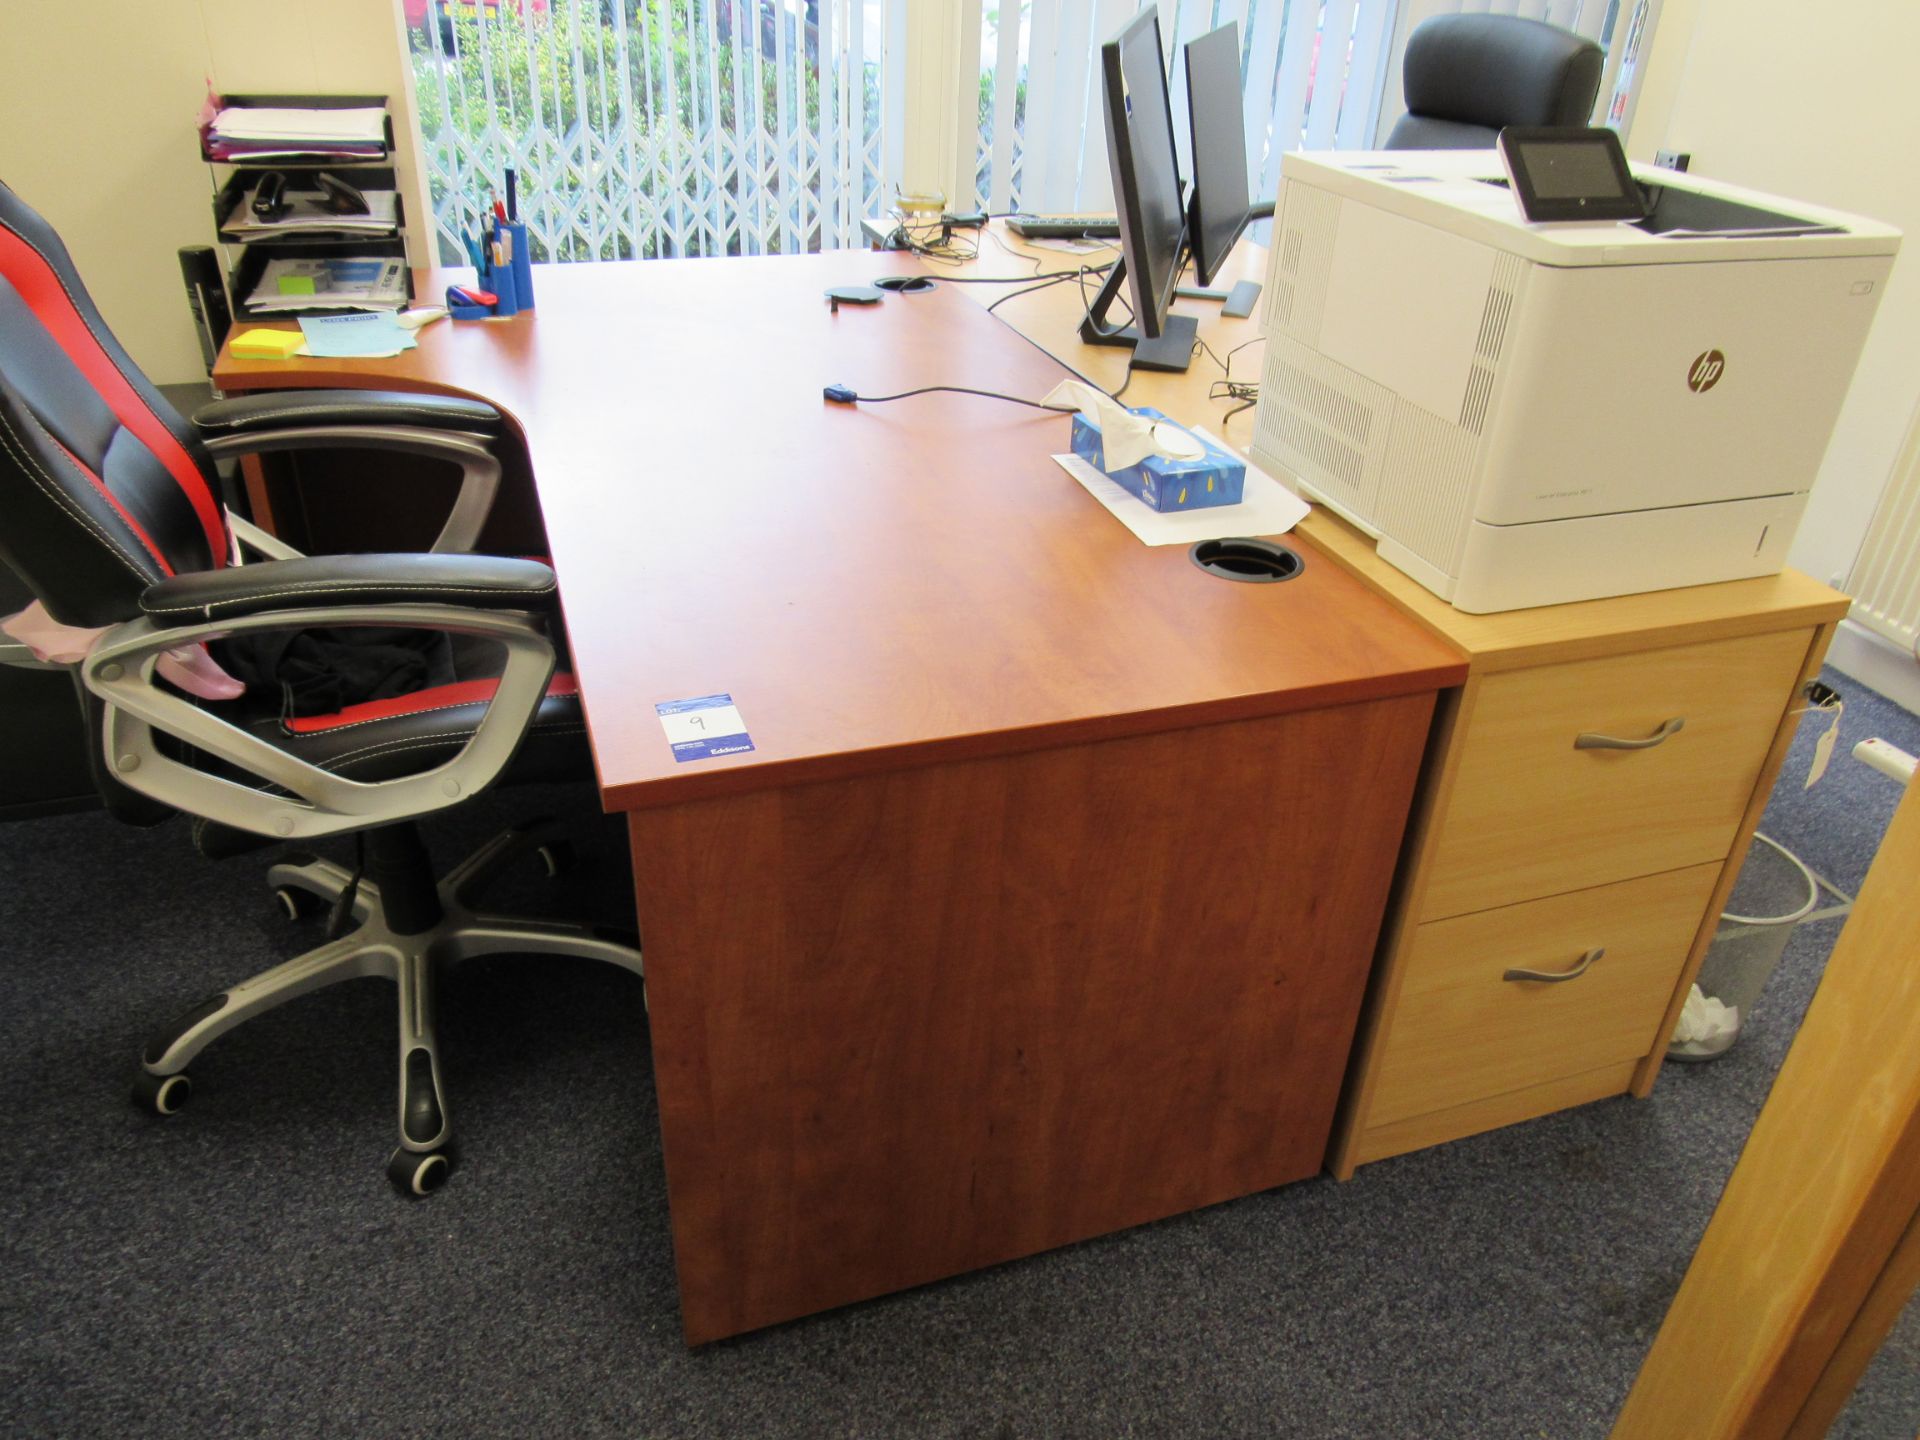 3 x 1 Person Desks to include 2 Office Chairs, 3 Drawers - Image 2 of 3